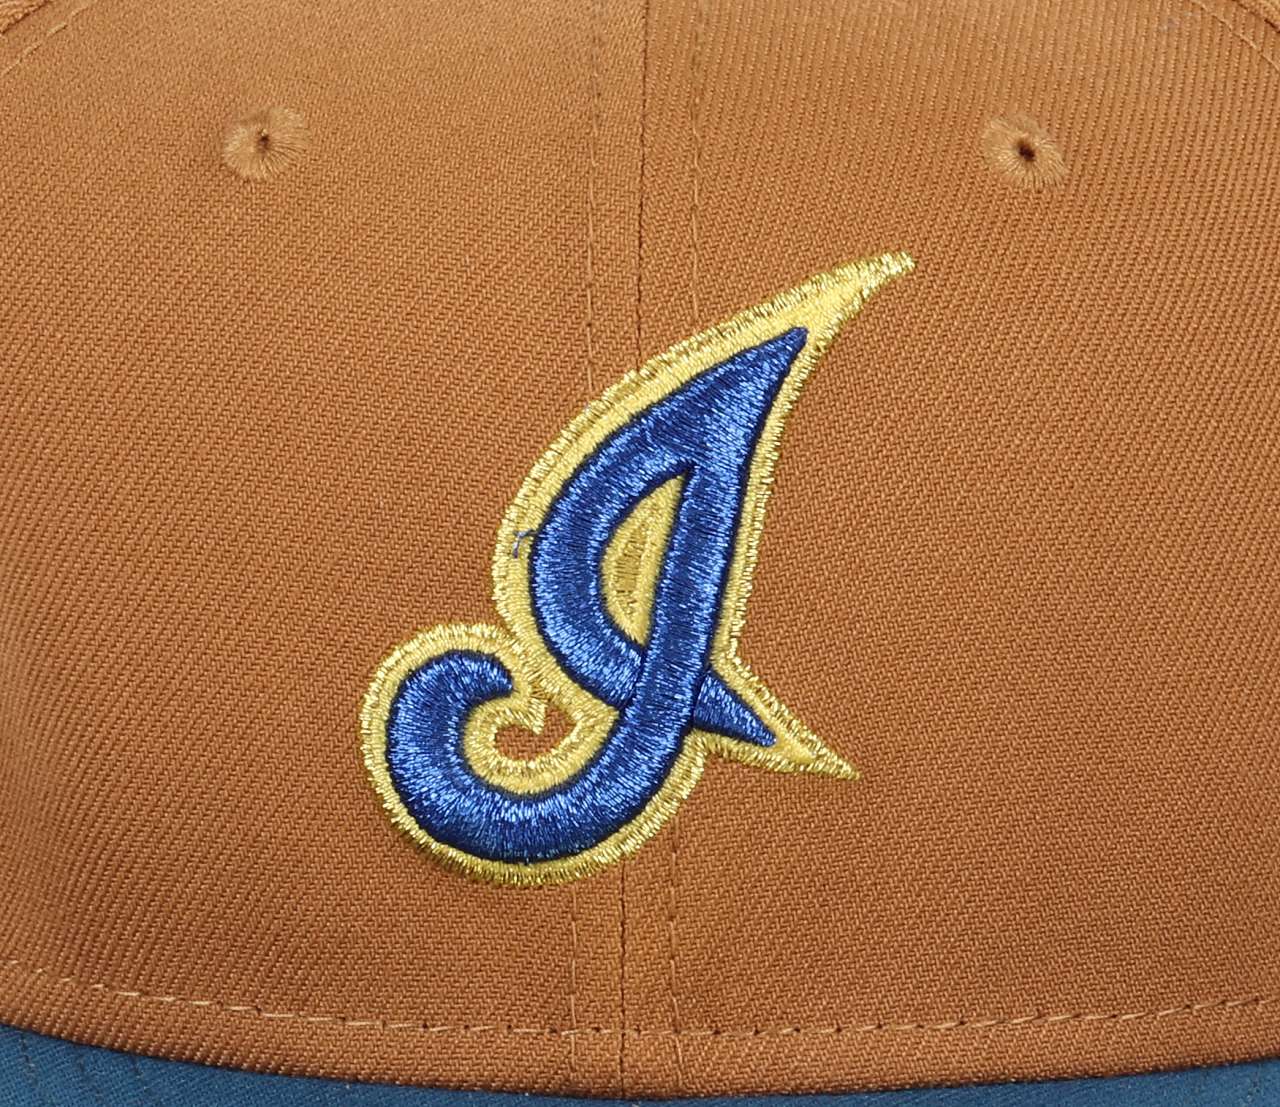 Cleveland Indians MLB Jacobs Field 10th Anniversary Sidepatch Brown Gold Blue 59Fifty Basecap New Era